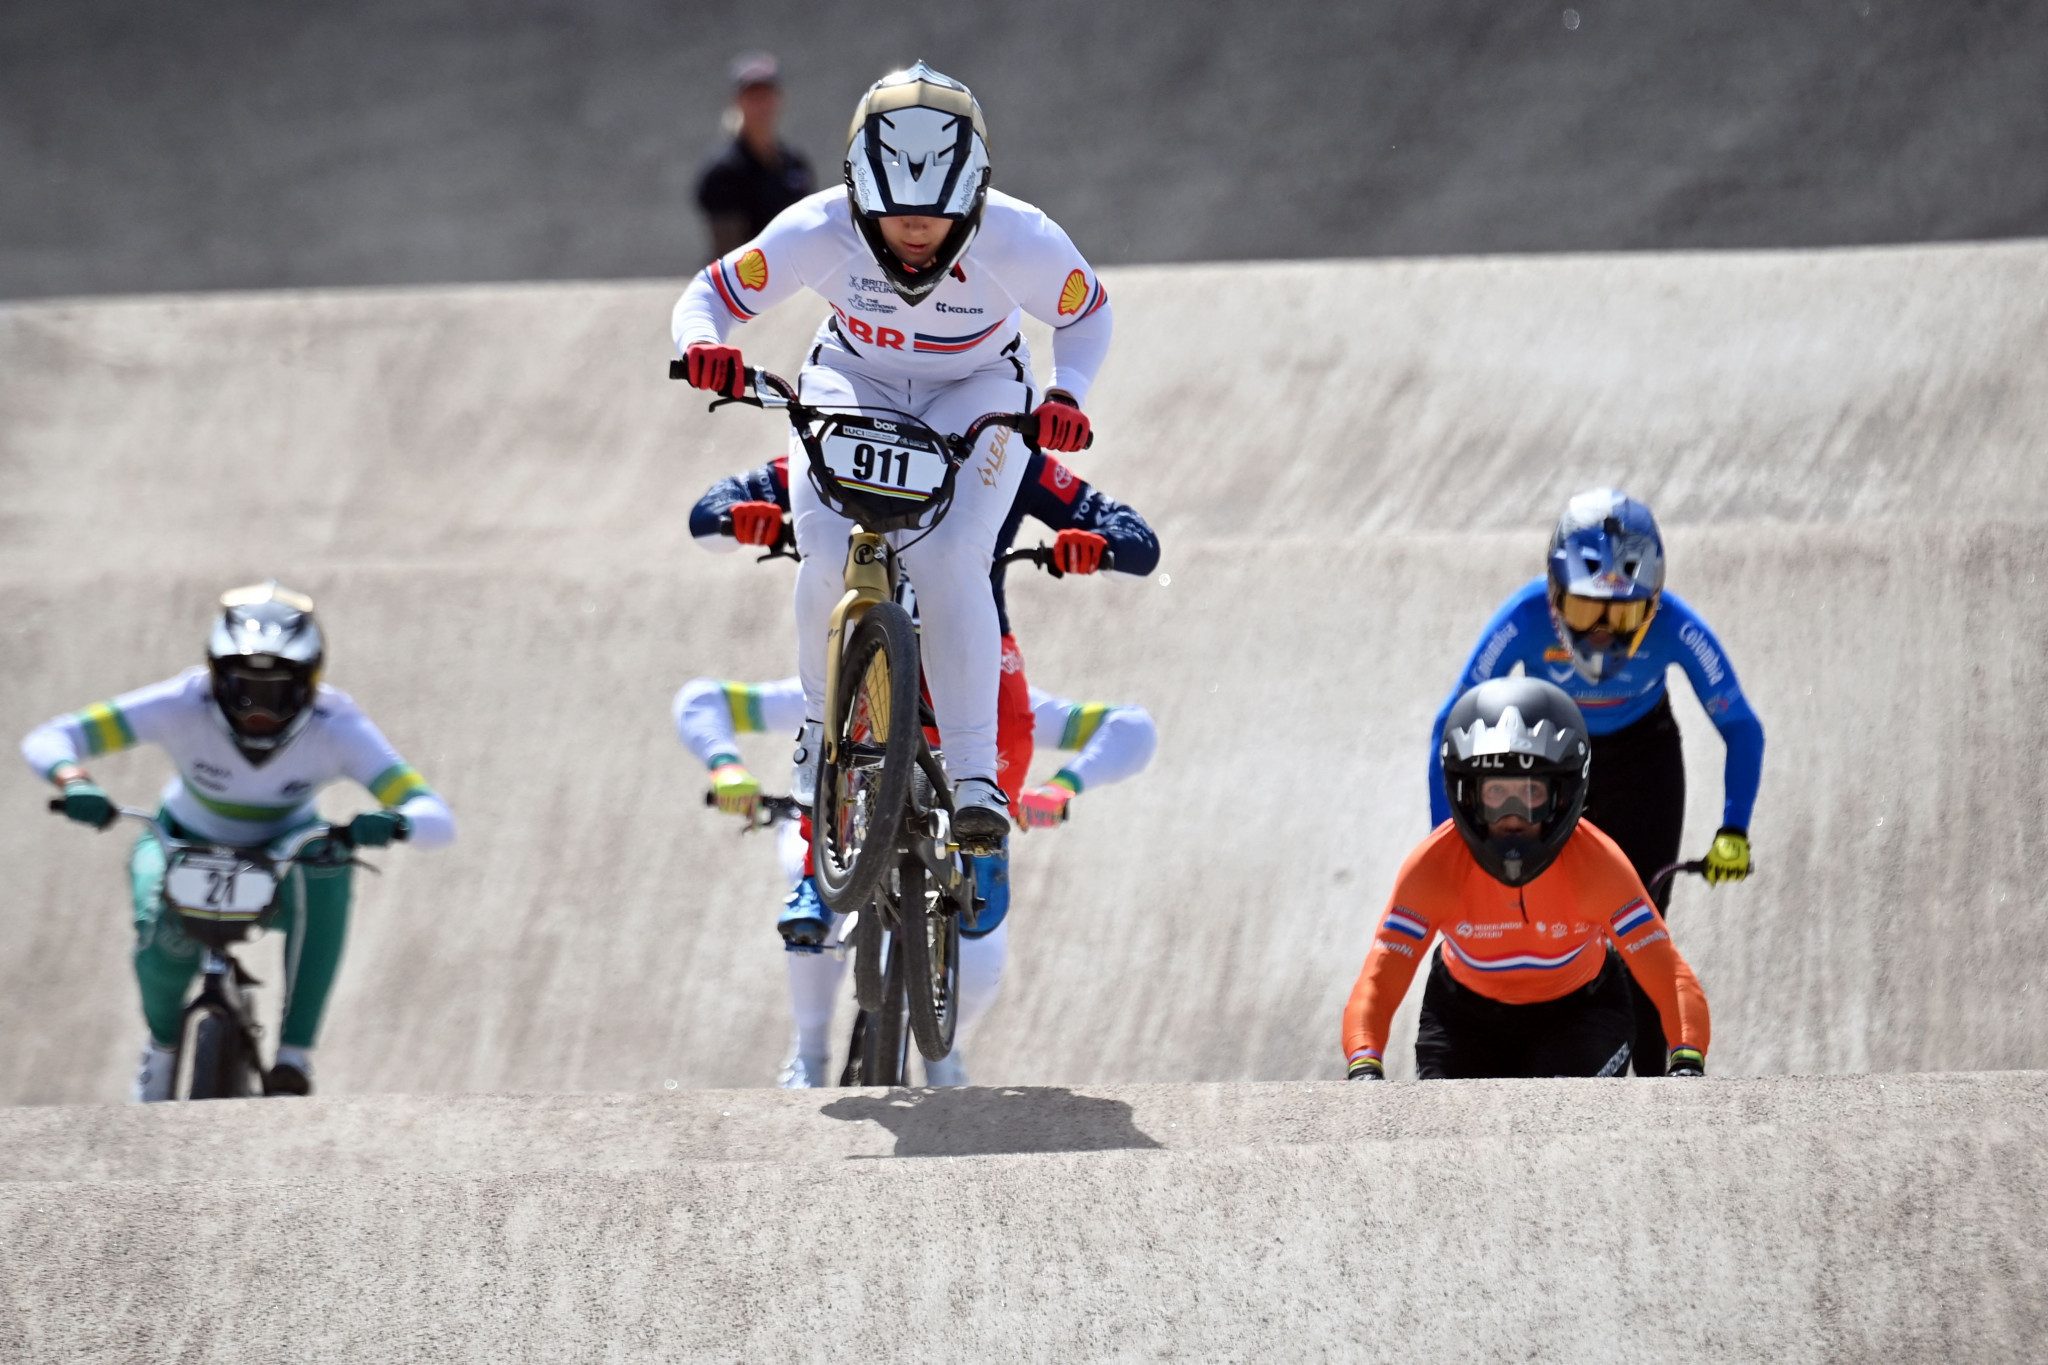 Bethany Shriever triumphed in the women's BMX racing final with the support of the home crowd ©Getty Images